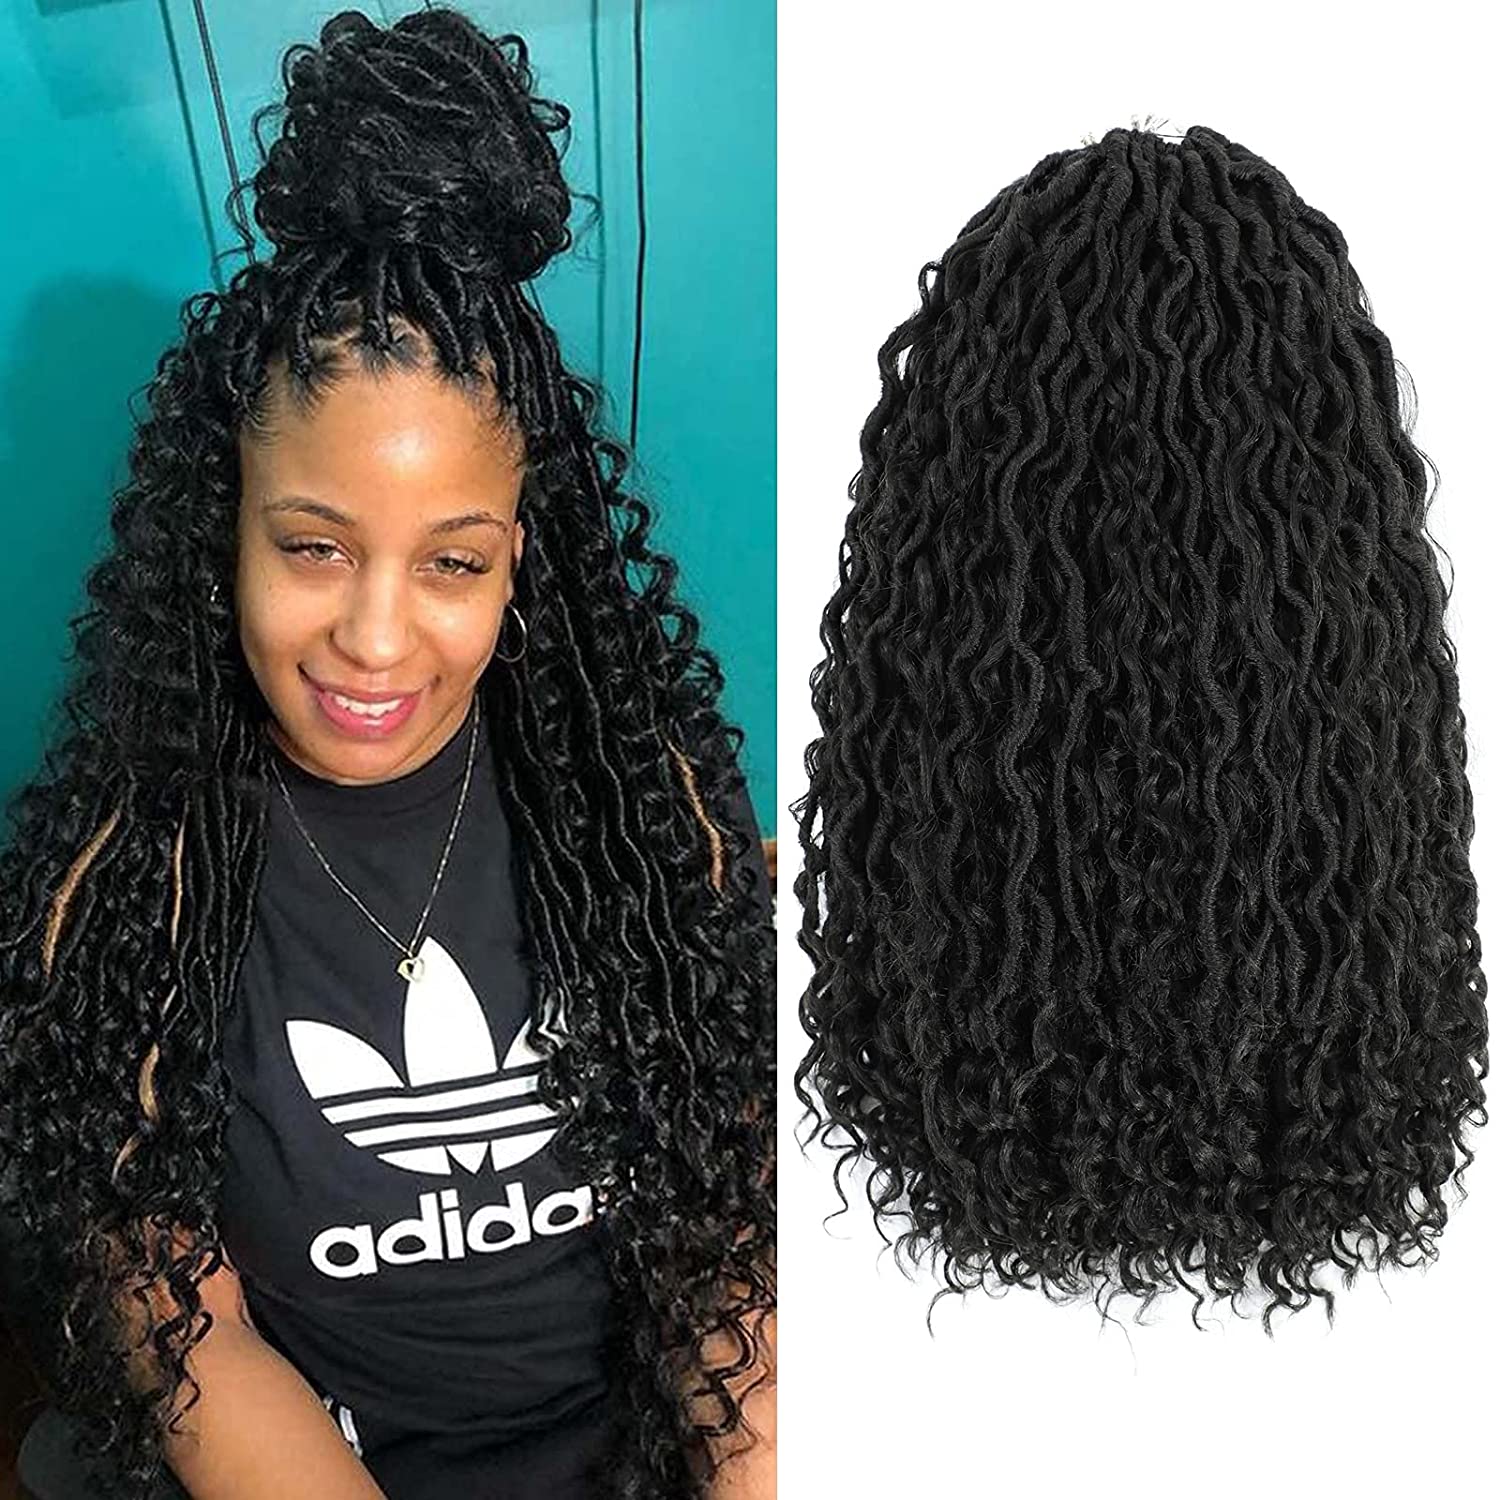 7 Packs 10 Inch Crochet Box Braids Hair With Curly Ends Prelooped